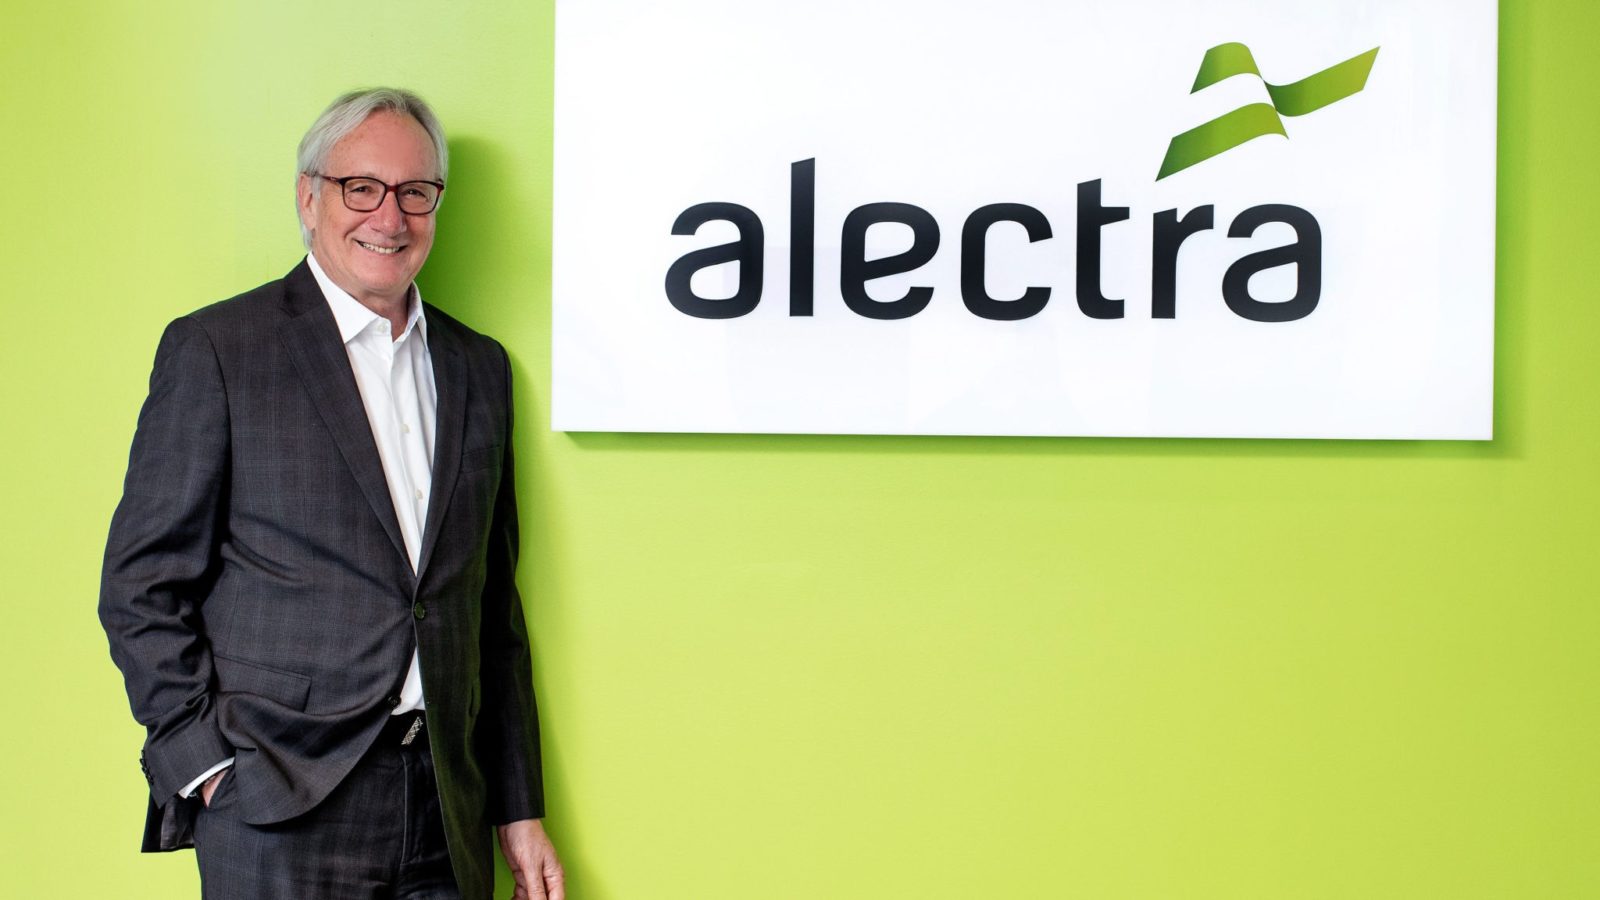 Blair Peperdy, with his hand in his pocket and wearing a black suit, stands beside an alectra logo and smiles